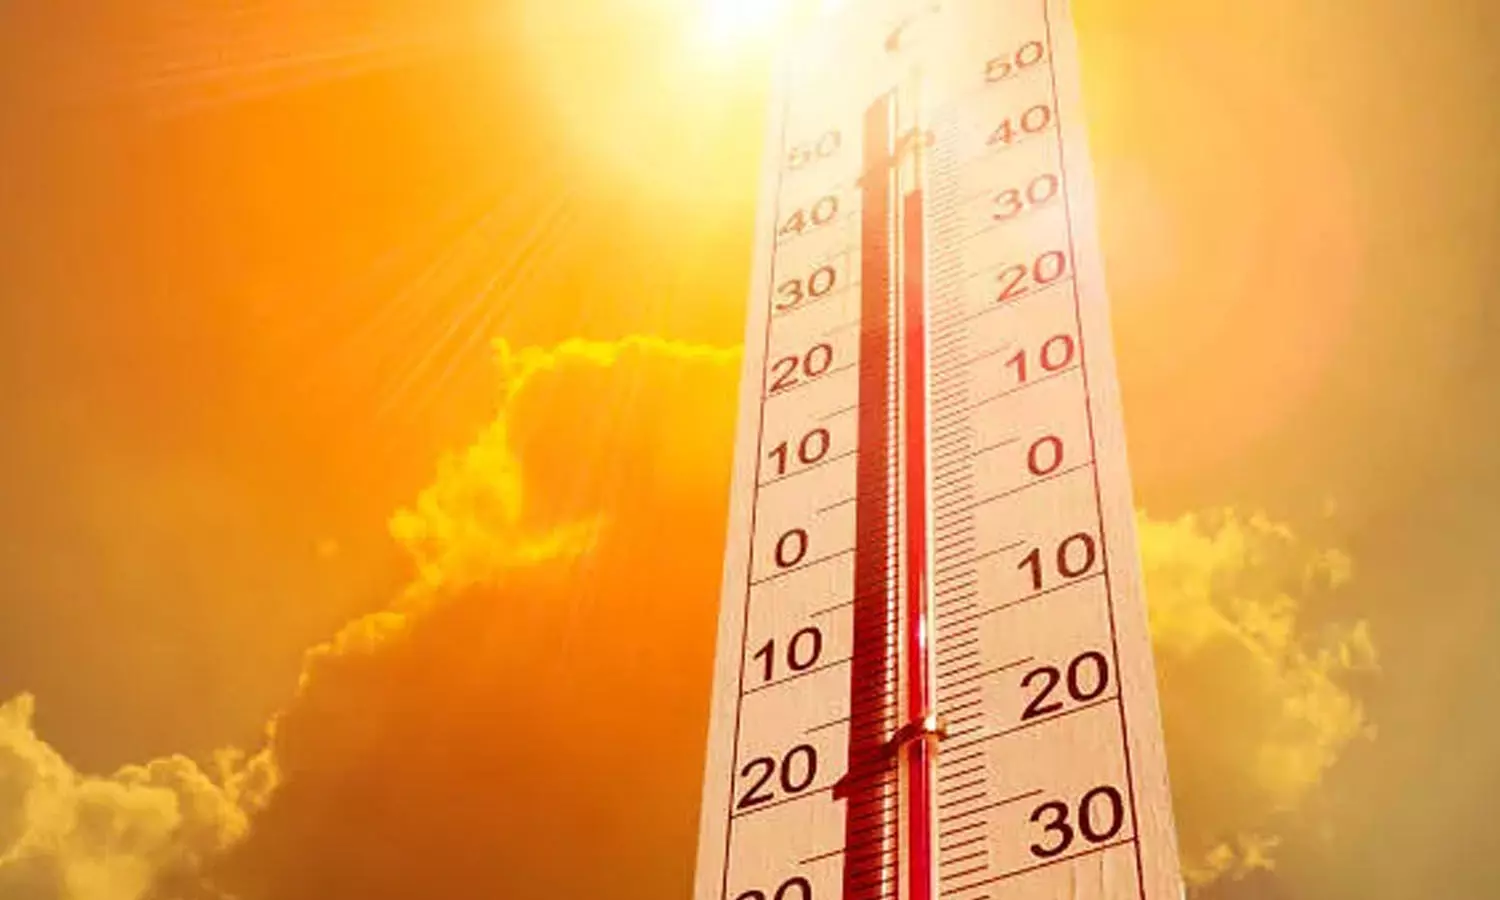 Soaring temperatures make Telangana hotter than last few years: Weather experts